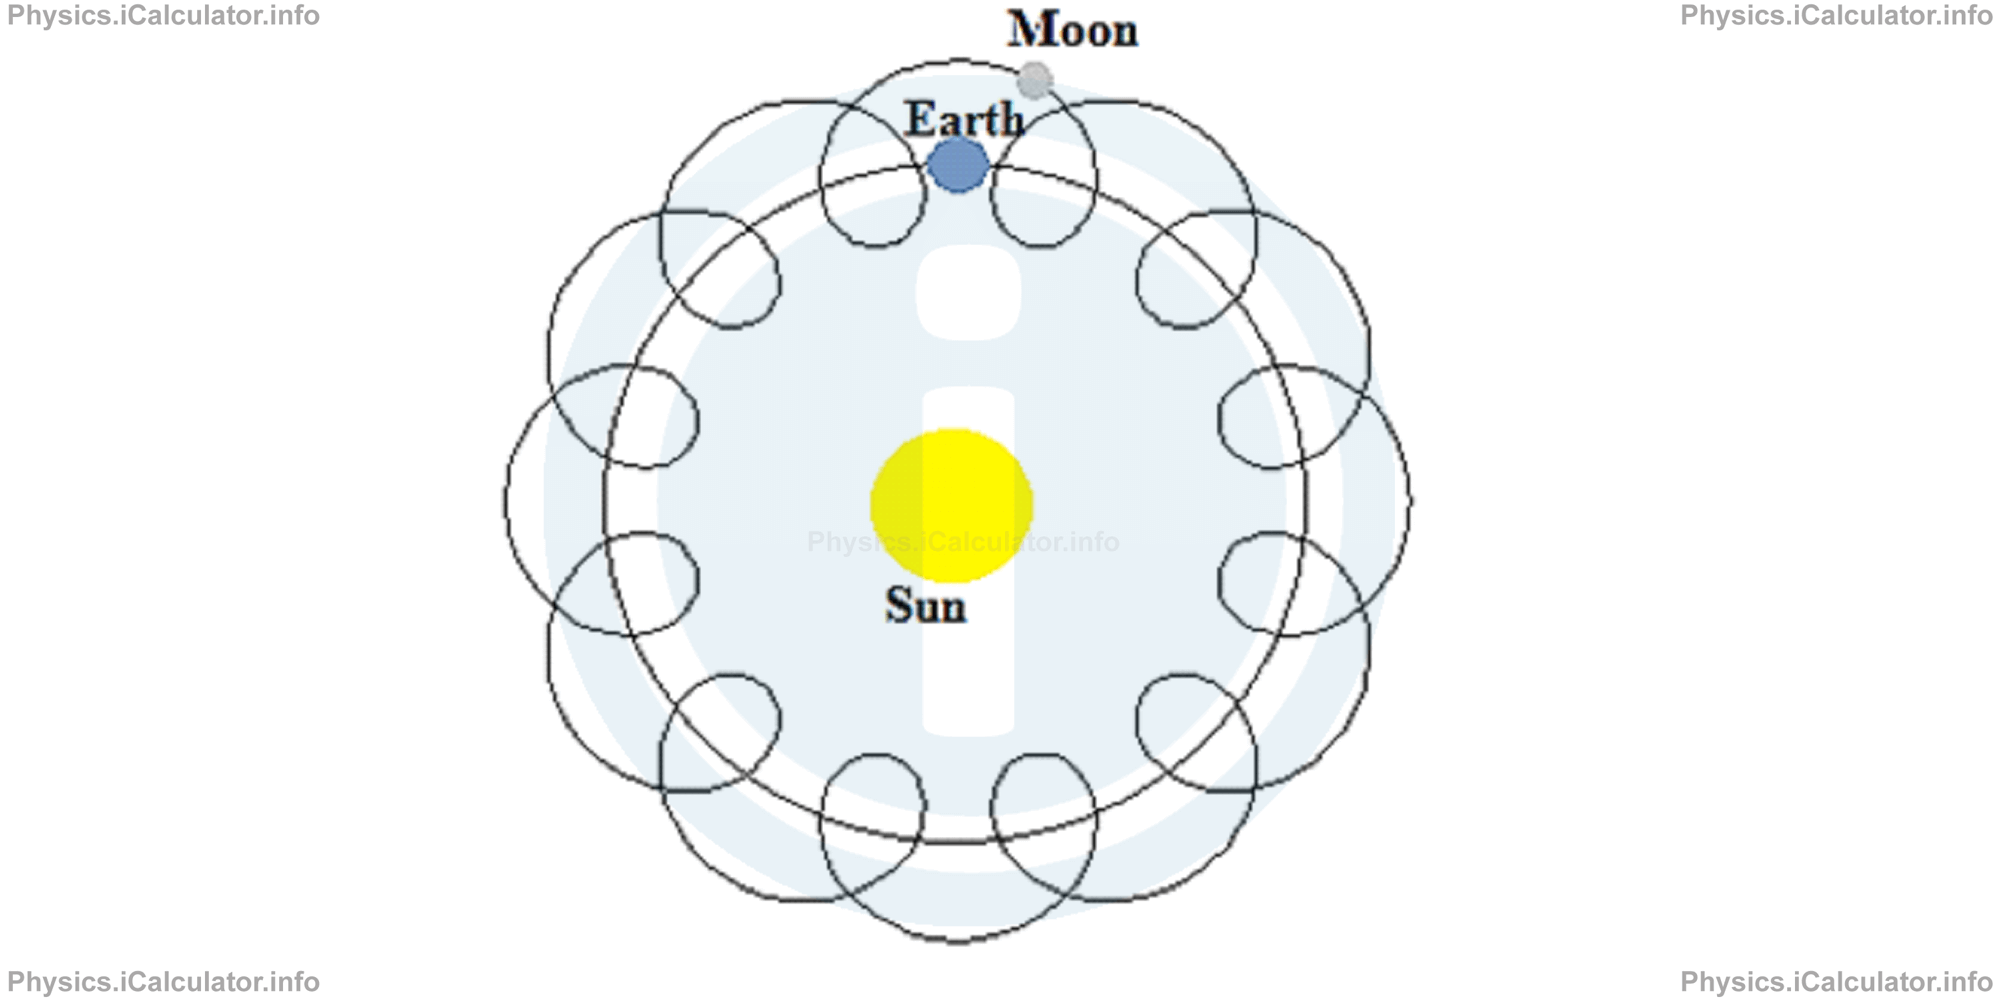 Physics Tutorials: This image provides visual information for the physics tutorial The Moon's Movement. Eclipses. Calendars 